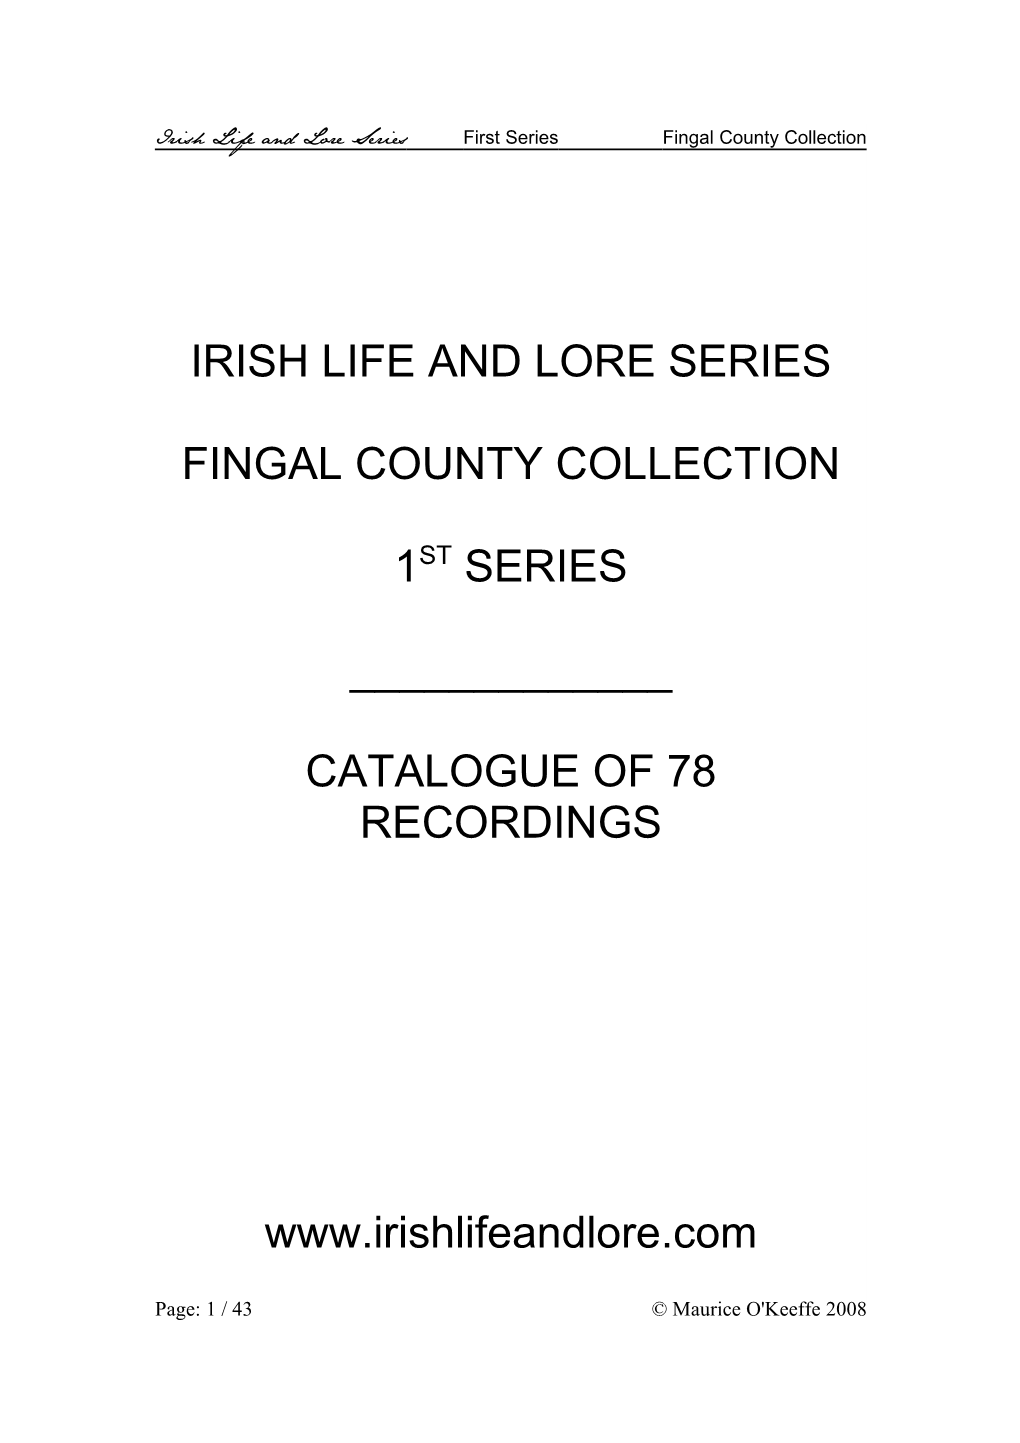 Irish Life and Lore Series Fingal County Collection